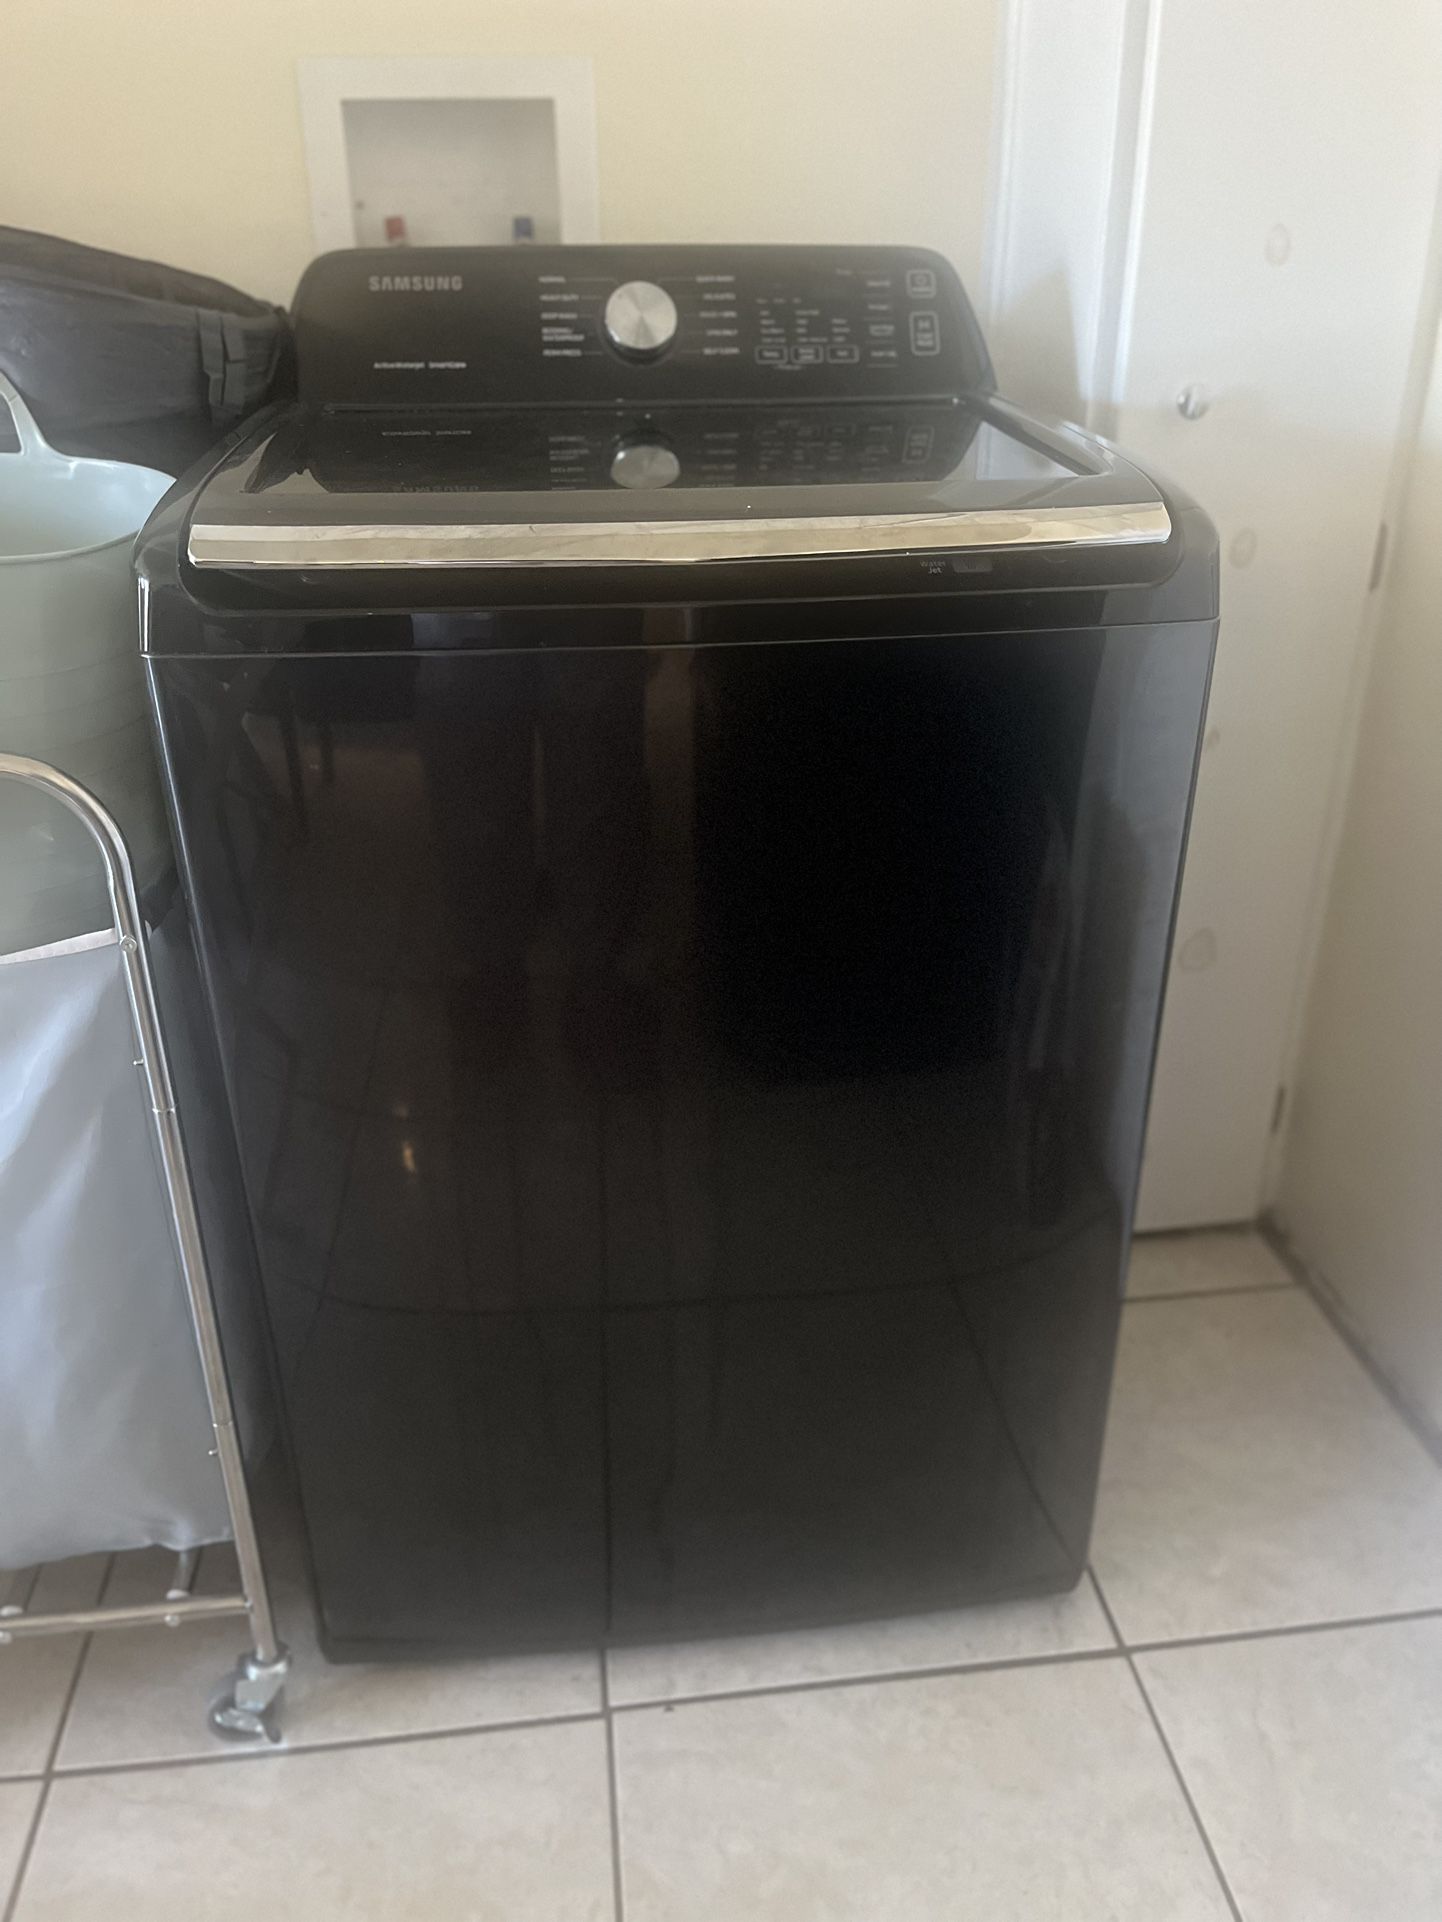 Samsung Top load Washer